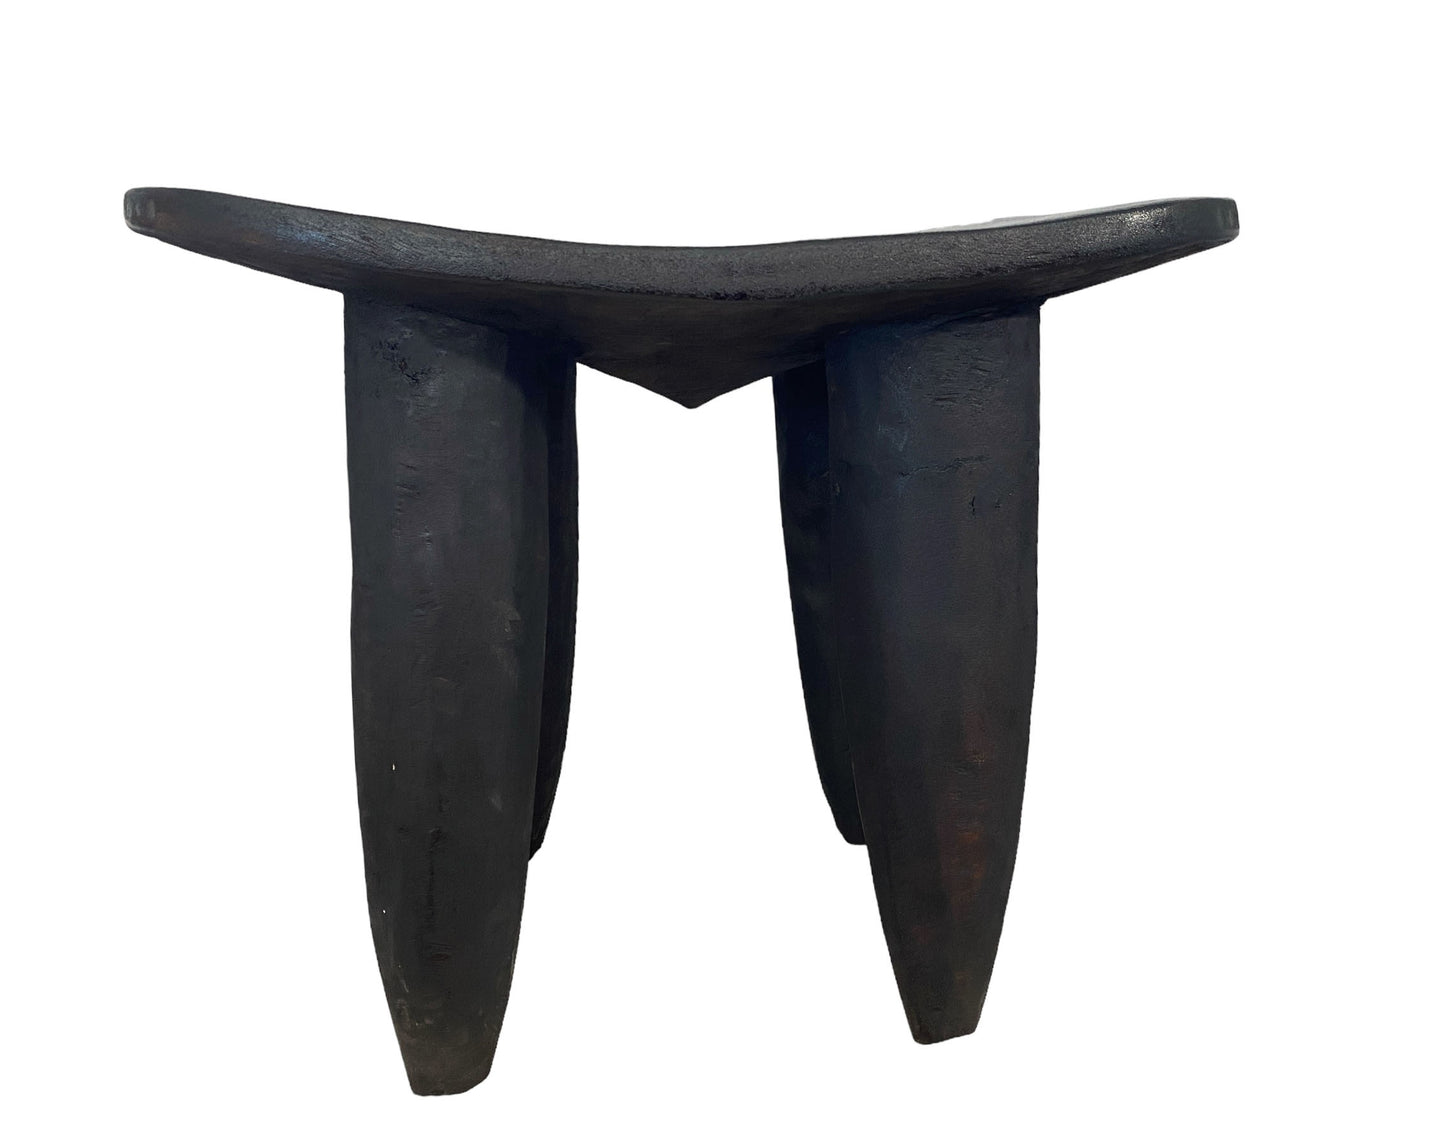 # 5907 African Carved Wood Senufo Table/Stool 21" W